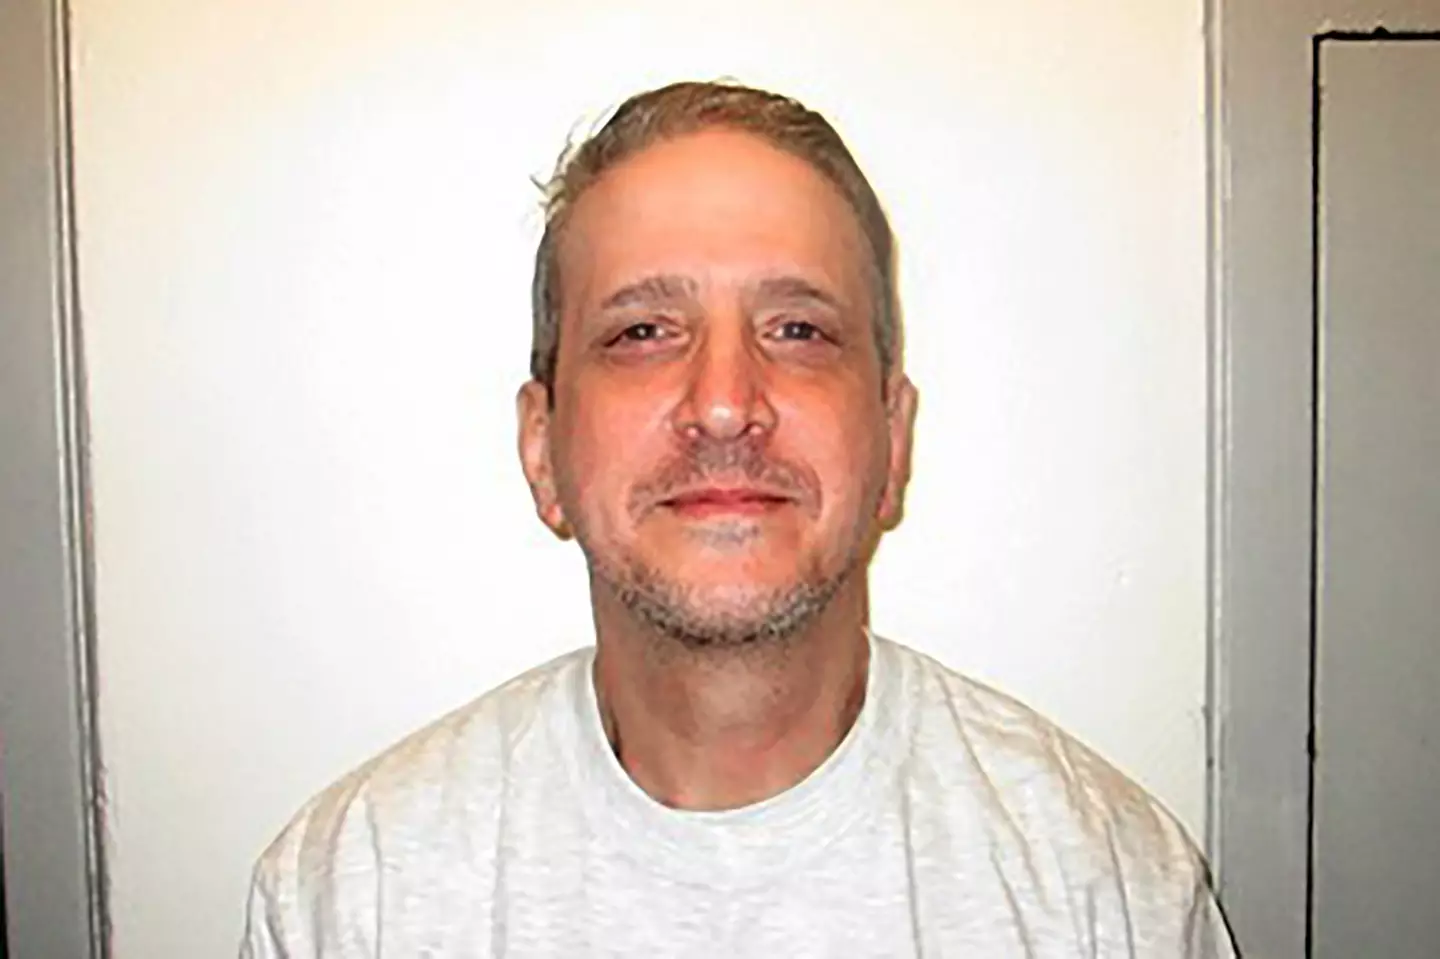 Death row inmate Richard Glossip has avoided seven execution dates and could miss an eighth after an independent review into his case was ordered.